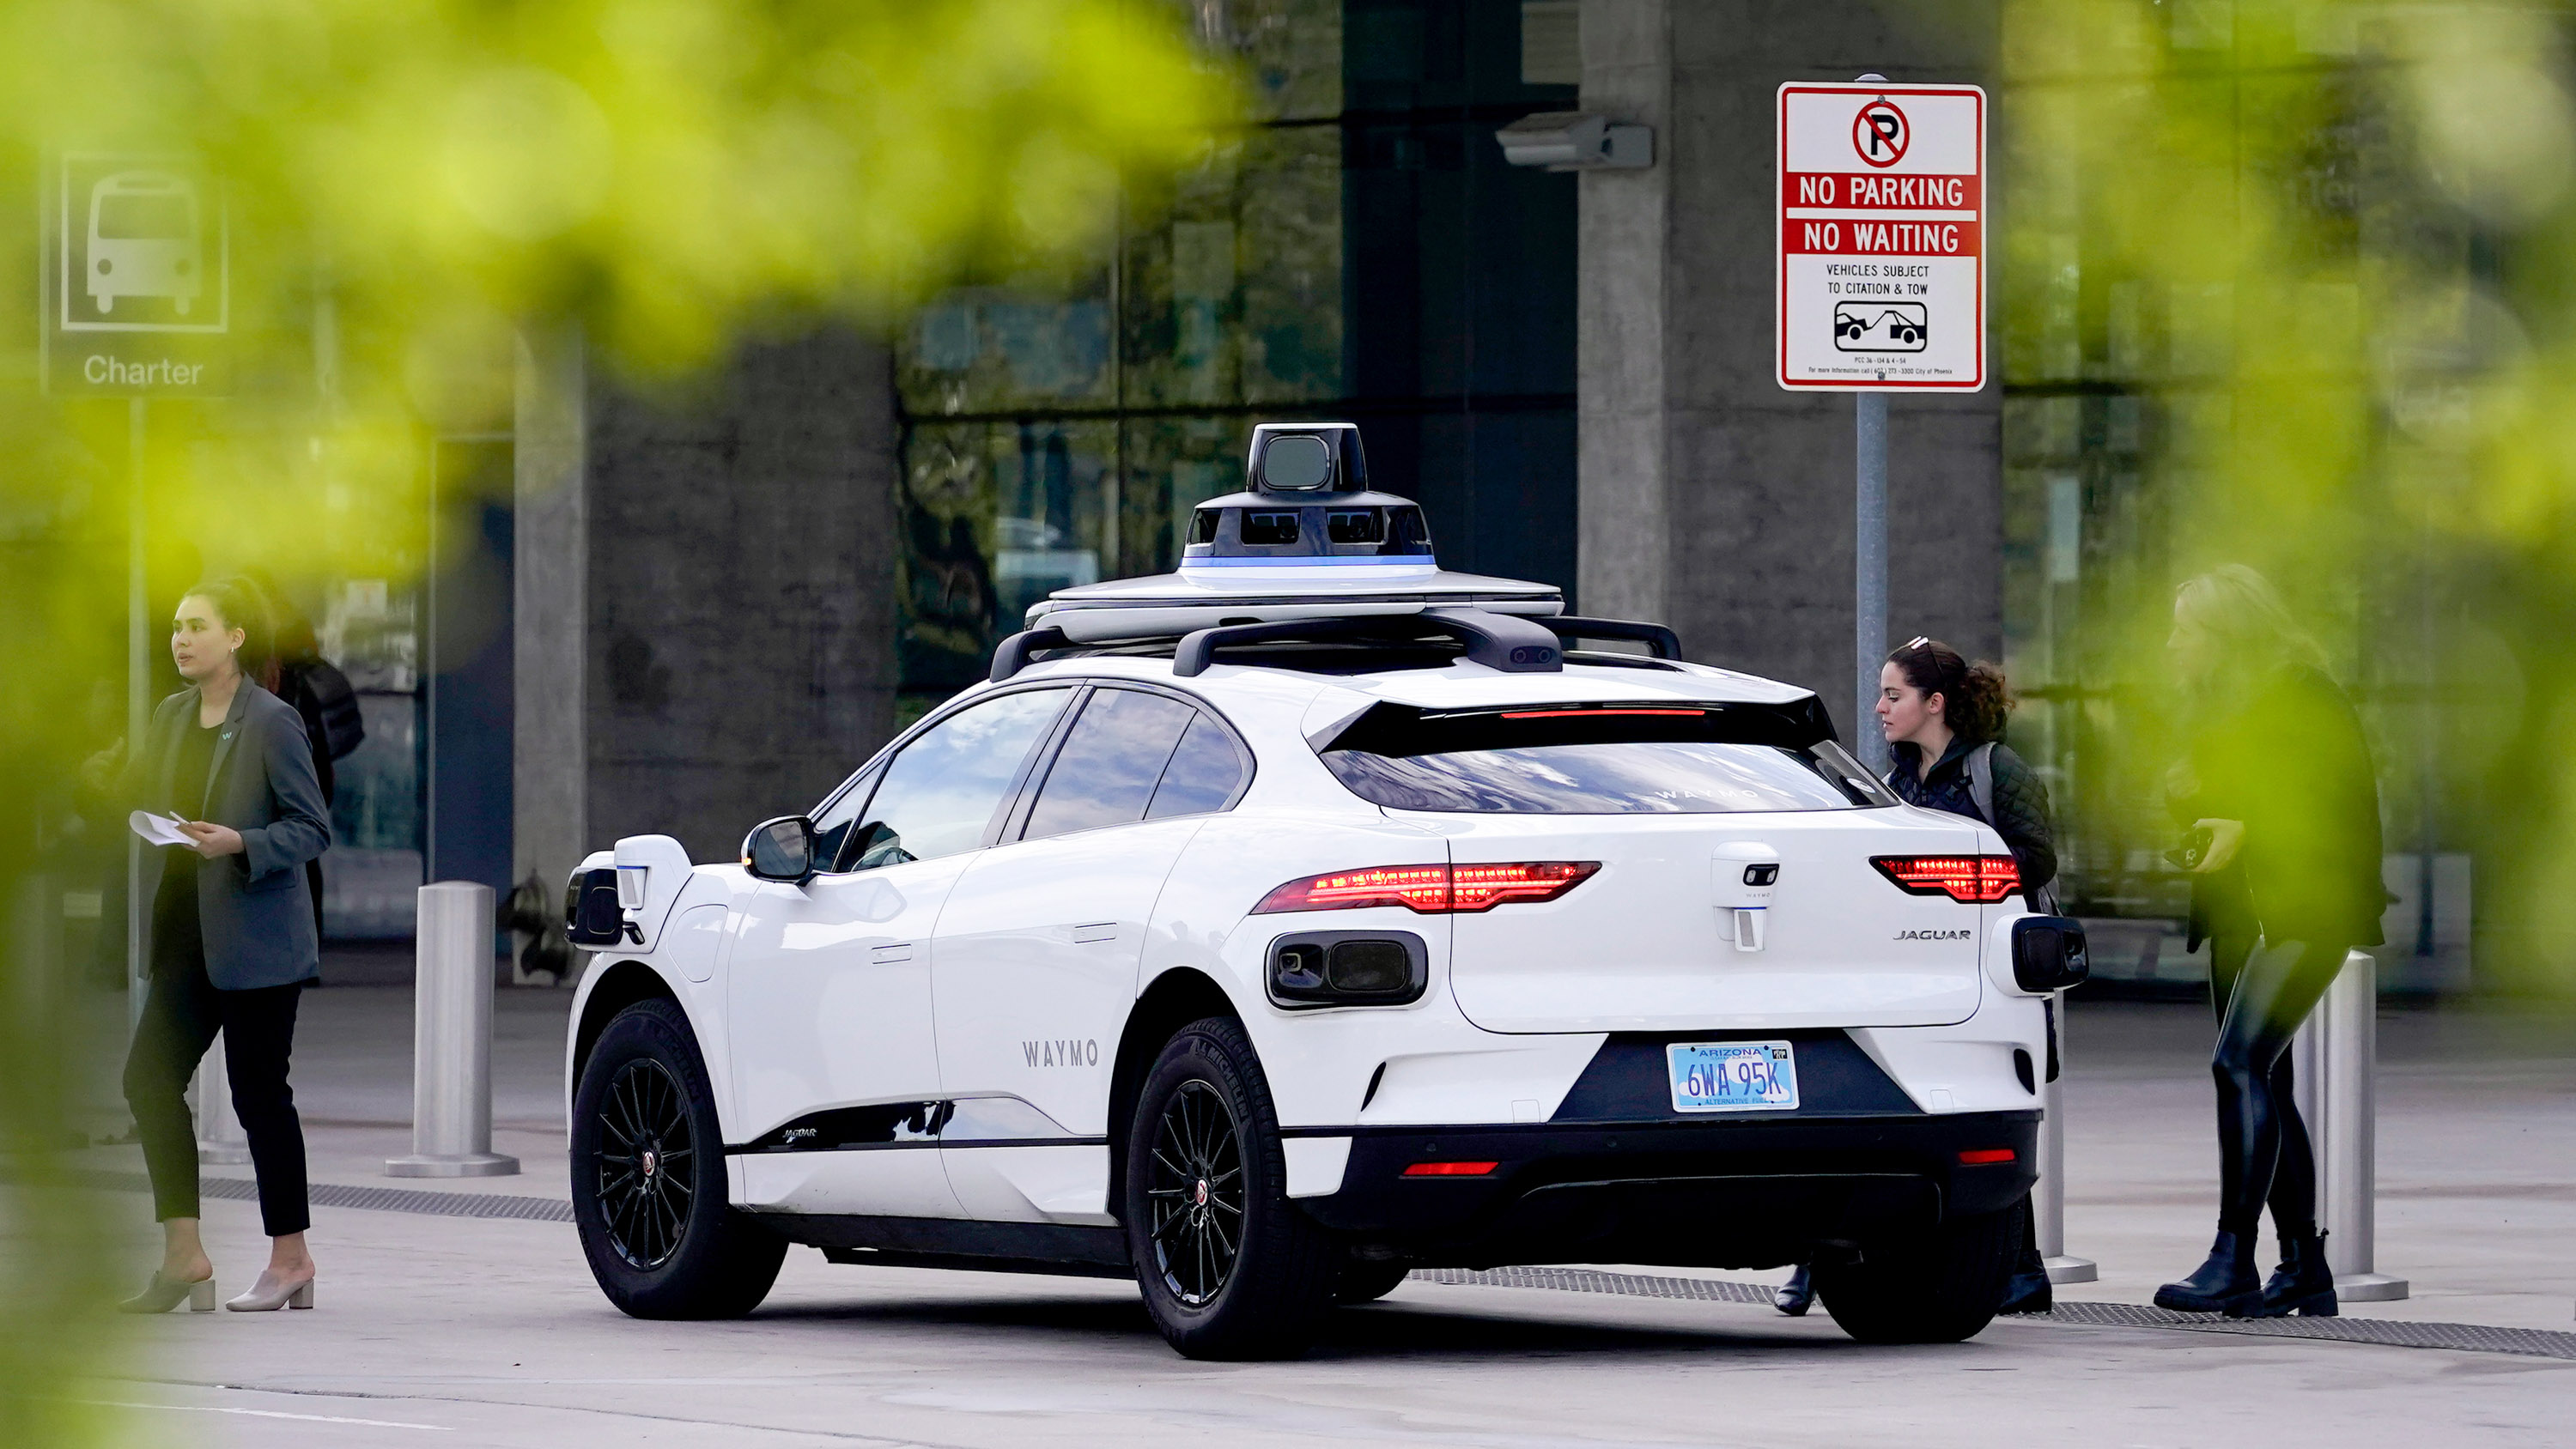 A Waymo self-driving vehicle sits curbside as a woman approaches for a ride